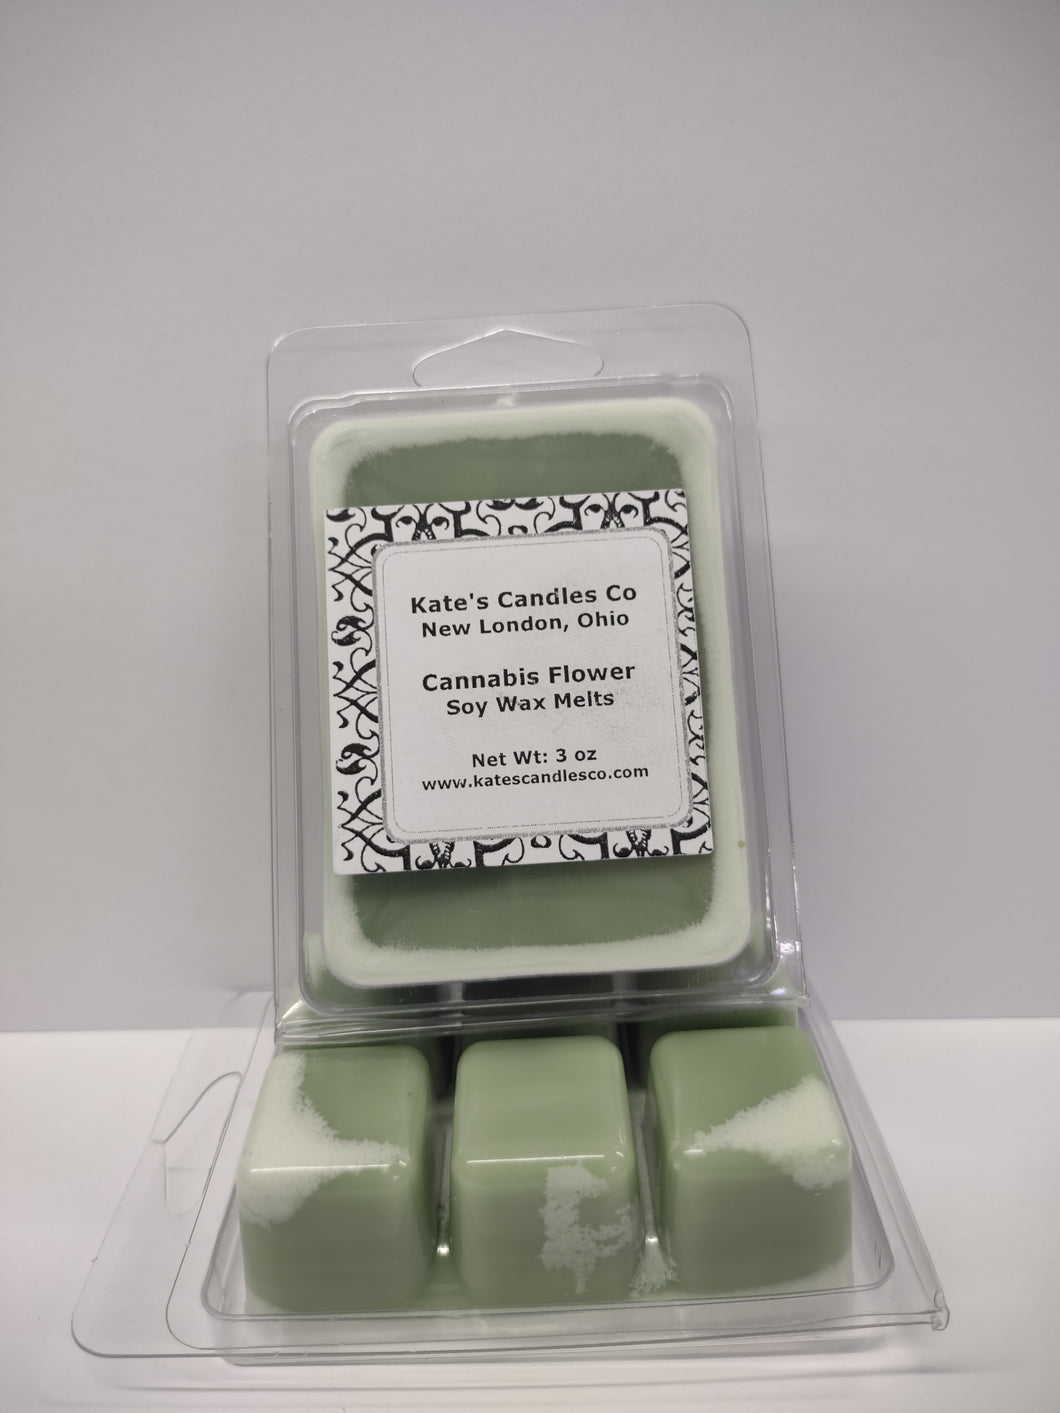 Cannabis Flower Scented Candles and Wax Melts - Kate's Candles Co.